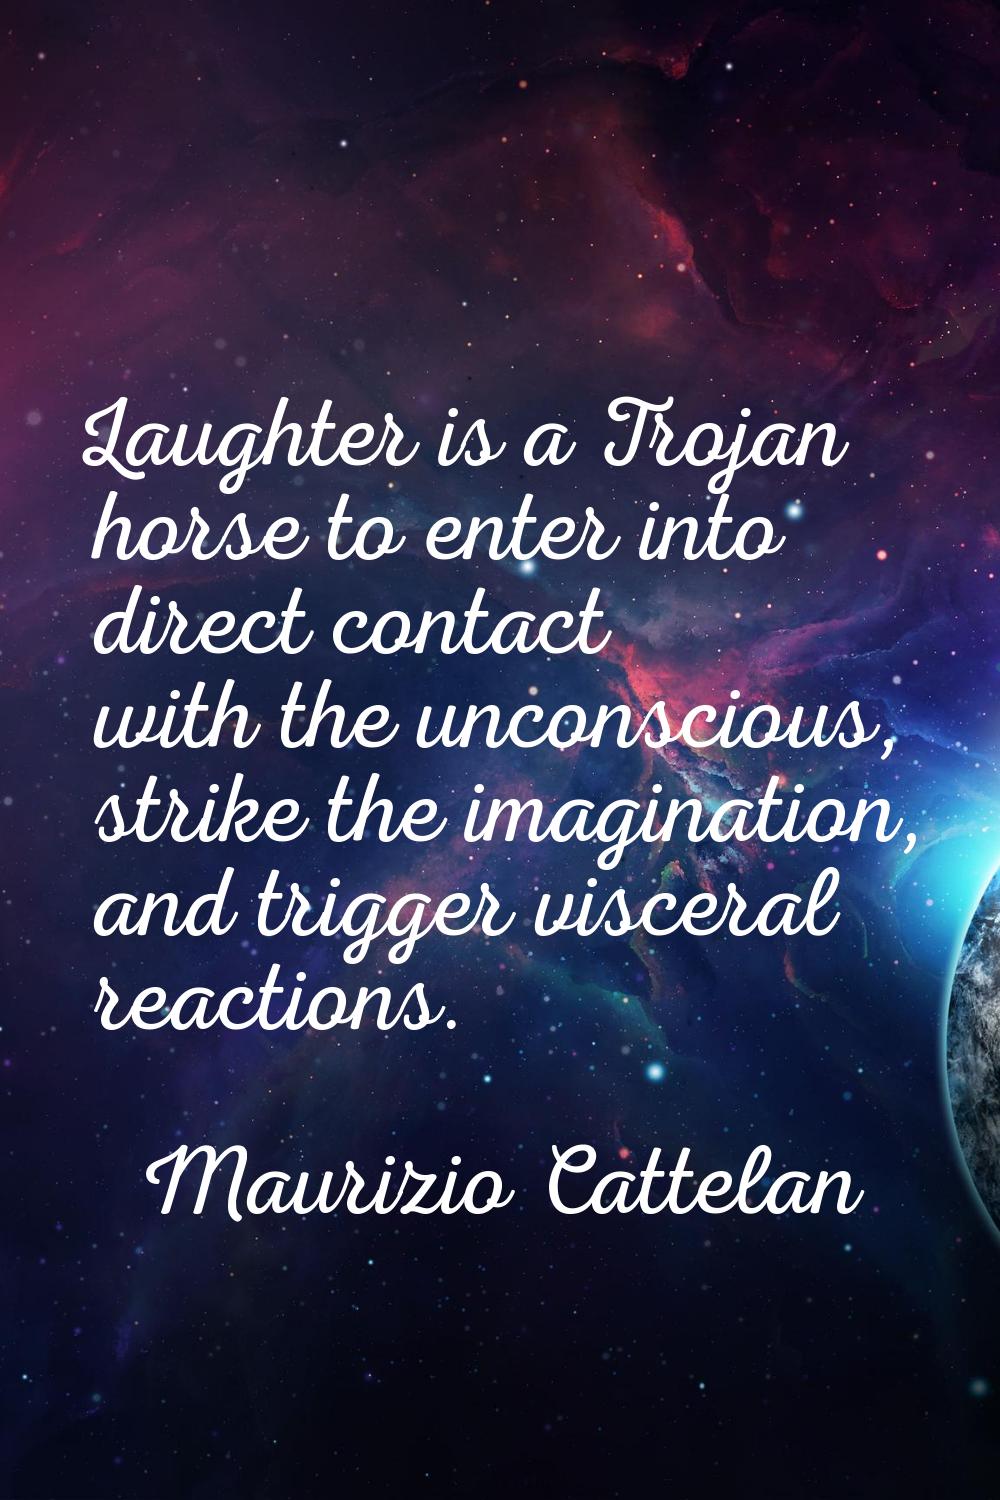 Laughter is a Trojan horse to enter into direct contact with the unconscious, strike the imaginatio